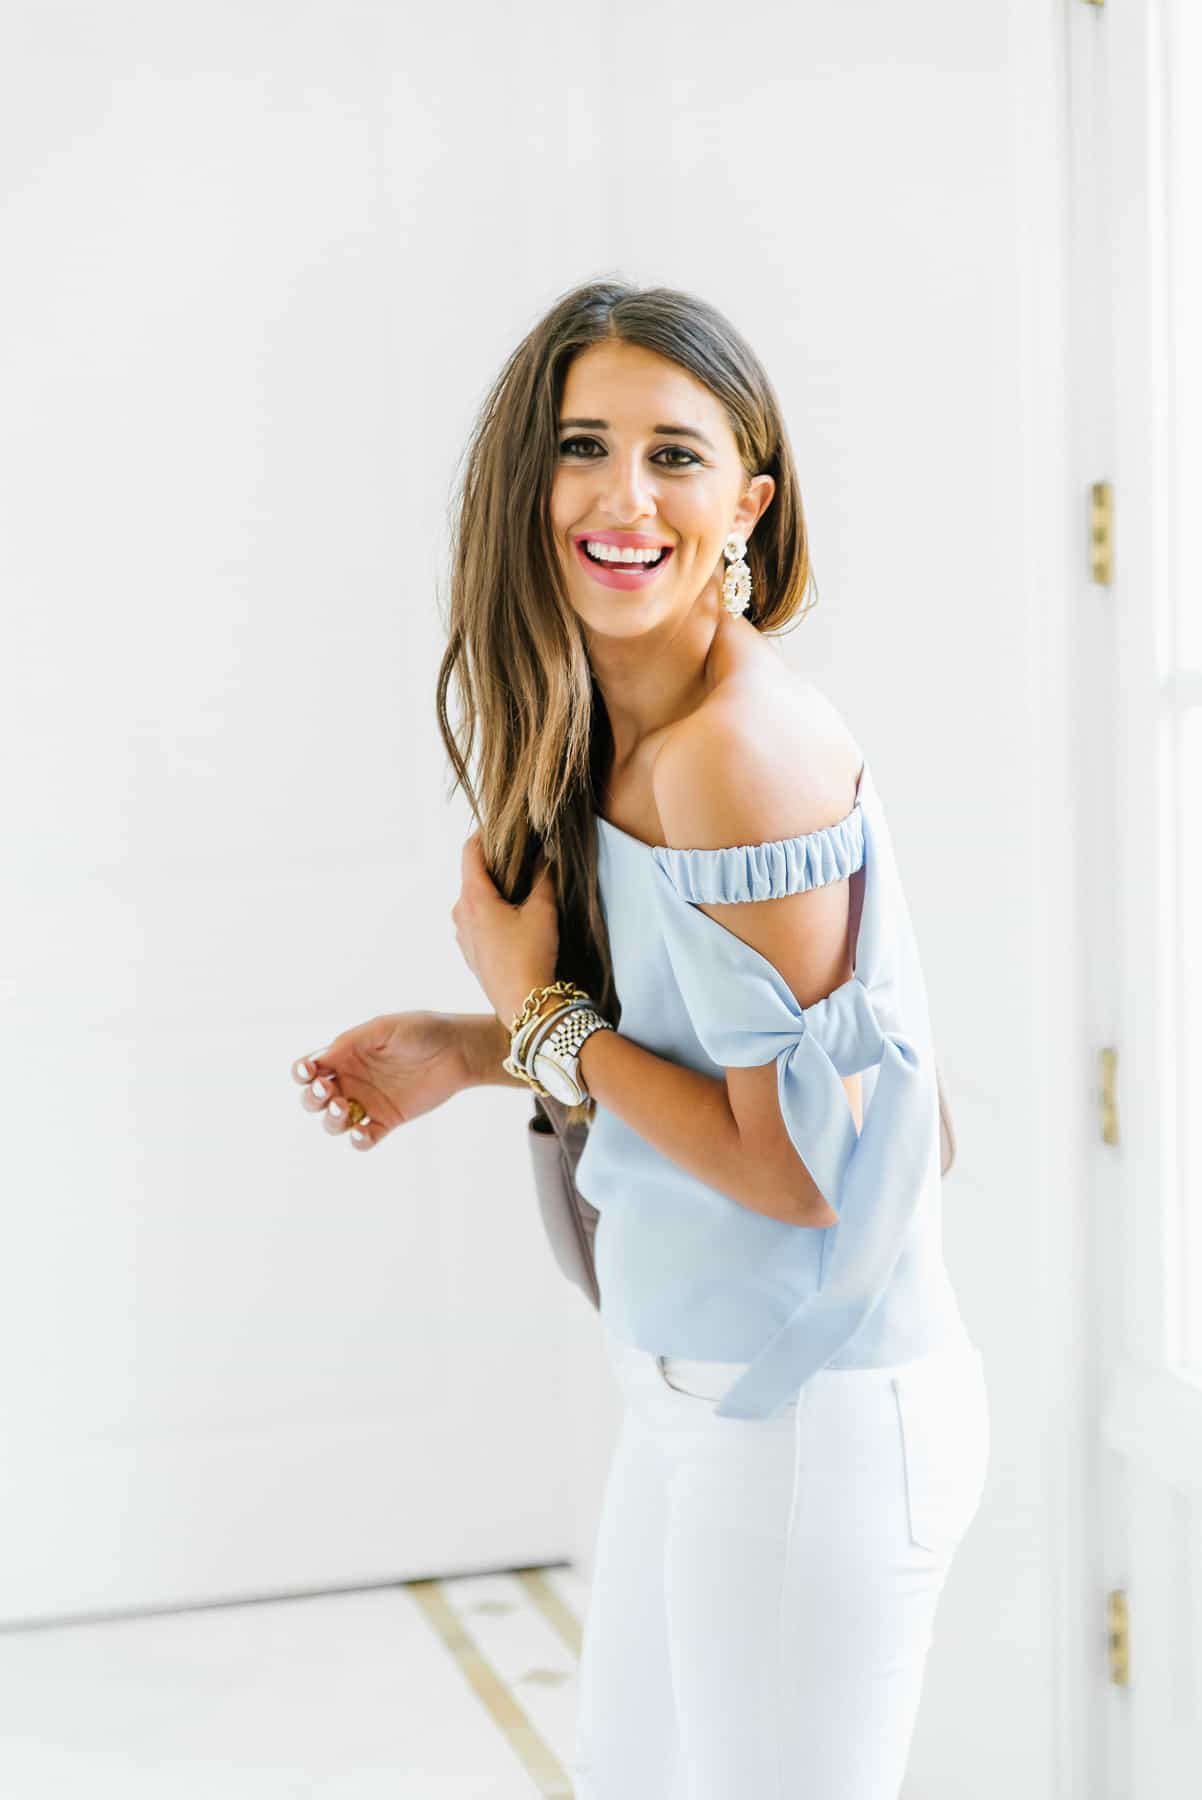 Dress Up Buttercup, Dede Raad, Fashion blogger, Houston blogger, off the shoulder top, white jeans ,